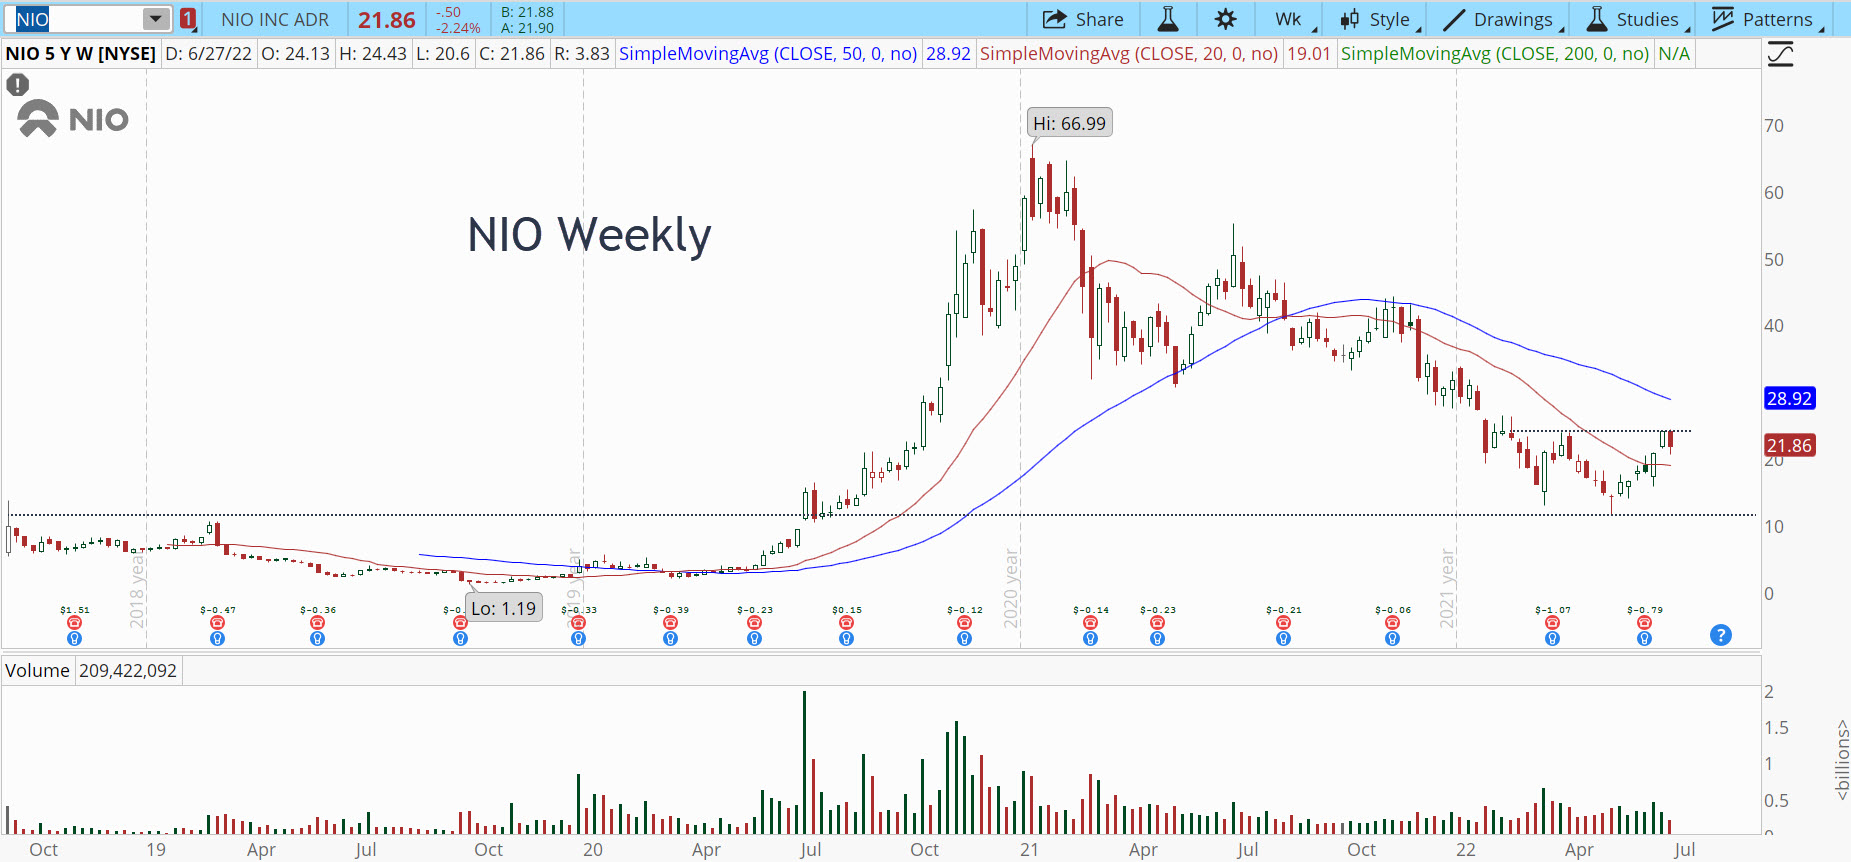 Nio (NIO) stock weekly chart with double bottom pattern.